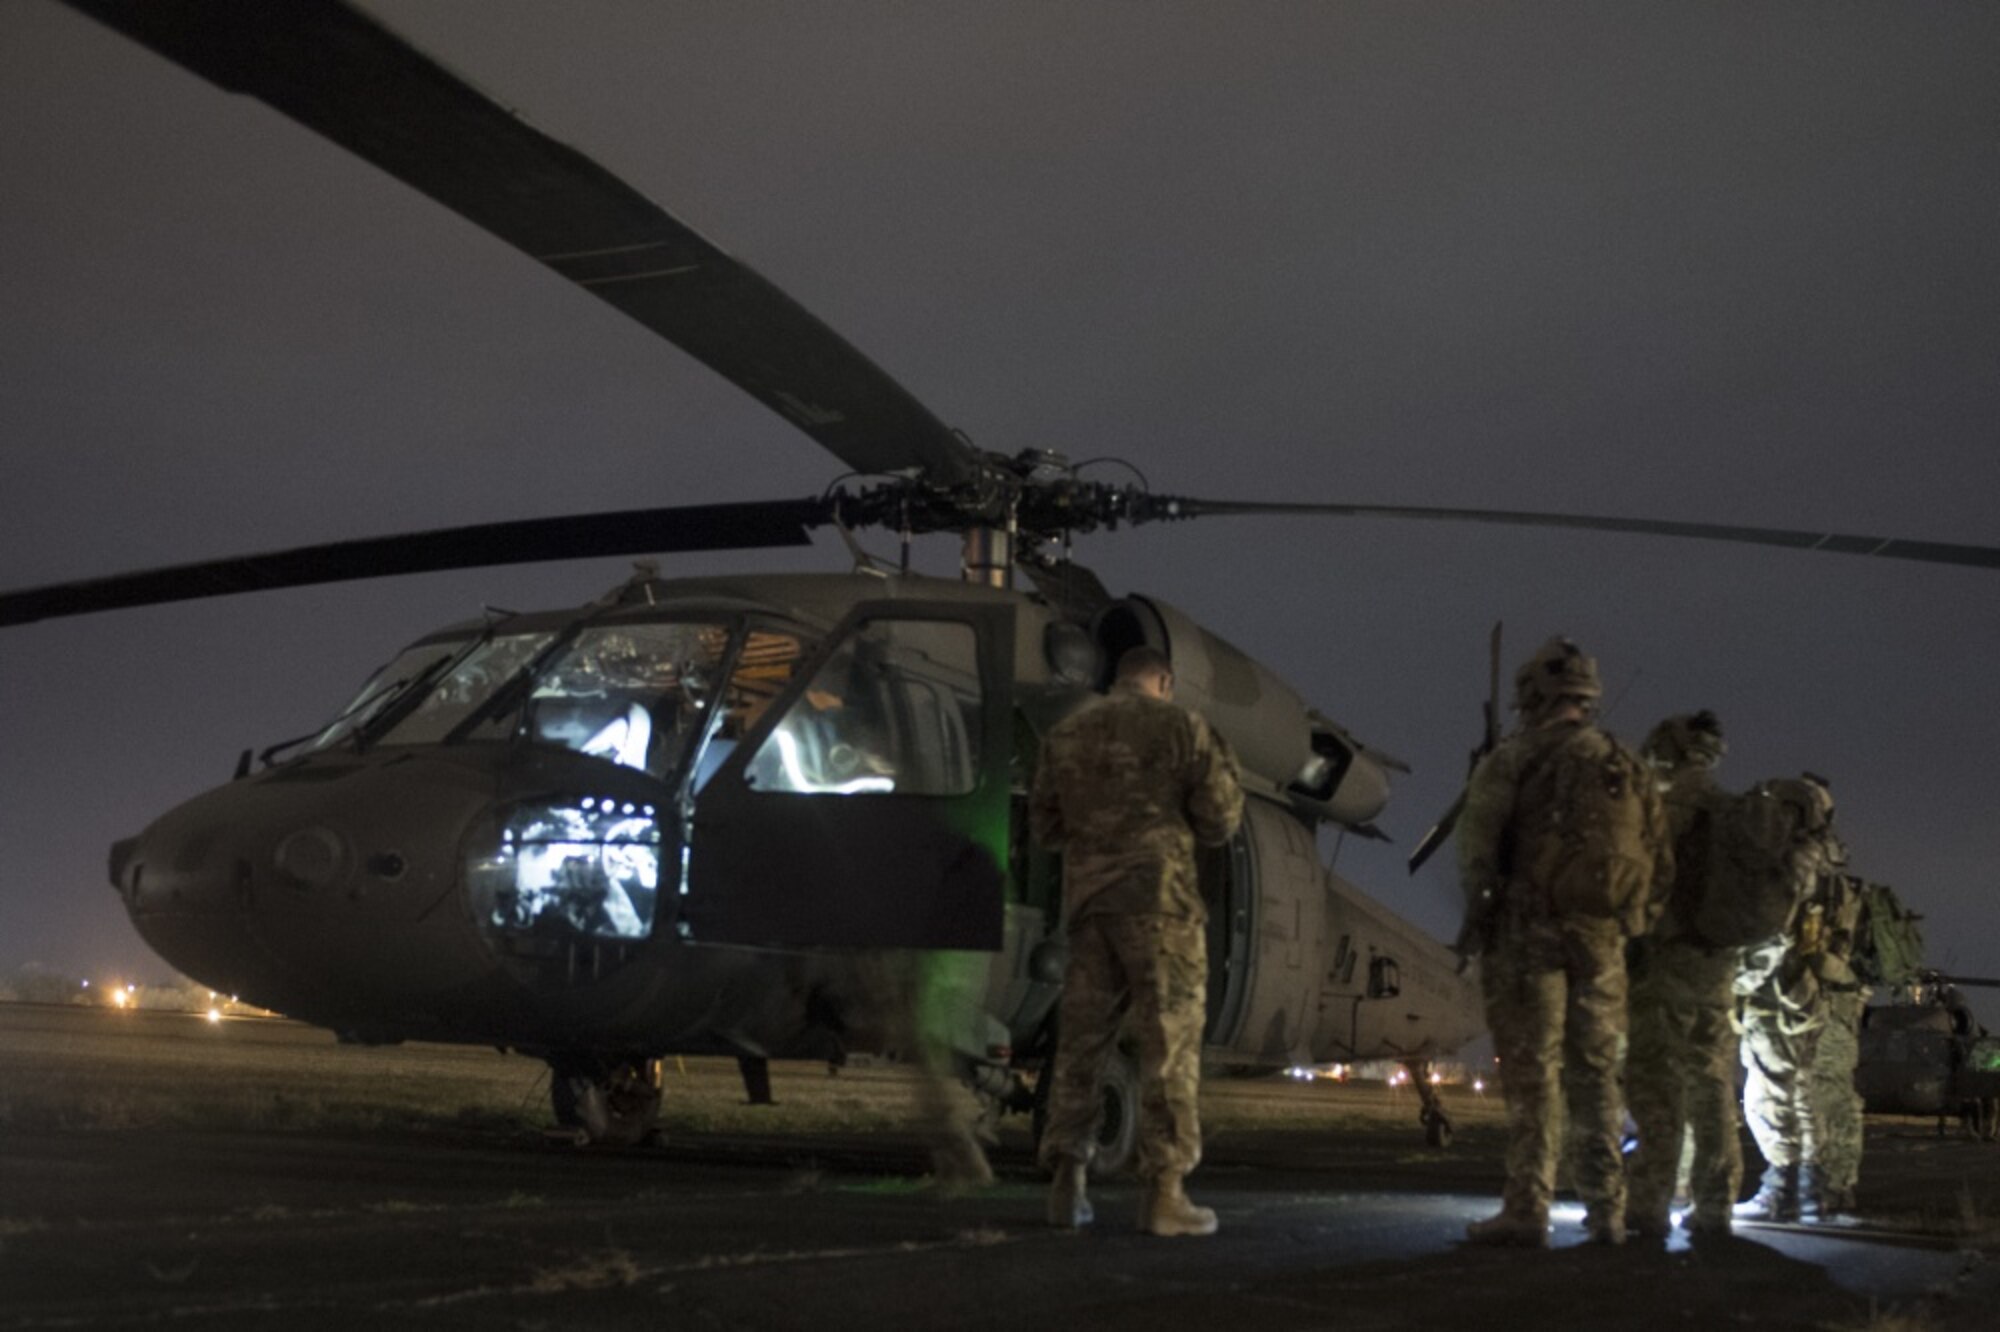 U.S. Air Force Special Tactics operators go over mission details with a U.S. Army UH-60 Black Hawk helicopter crew before conducting a direct action mission to kill or capture a high value individual during exercise Southern Strike 2020, at Camp McCain Training Center, Miss., Feb. 3, 2020. Southern Strike is a large-scale, joint and international combat exercise, featuring counter insurgency, close air-support, en-route casualty care, non-combatant evacuation and maritime special operations.